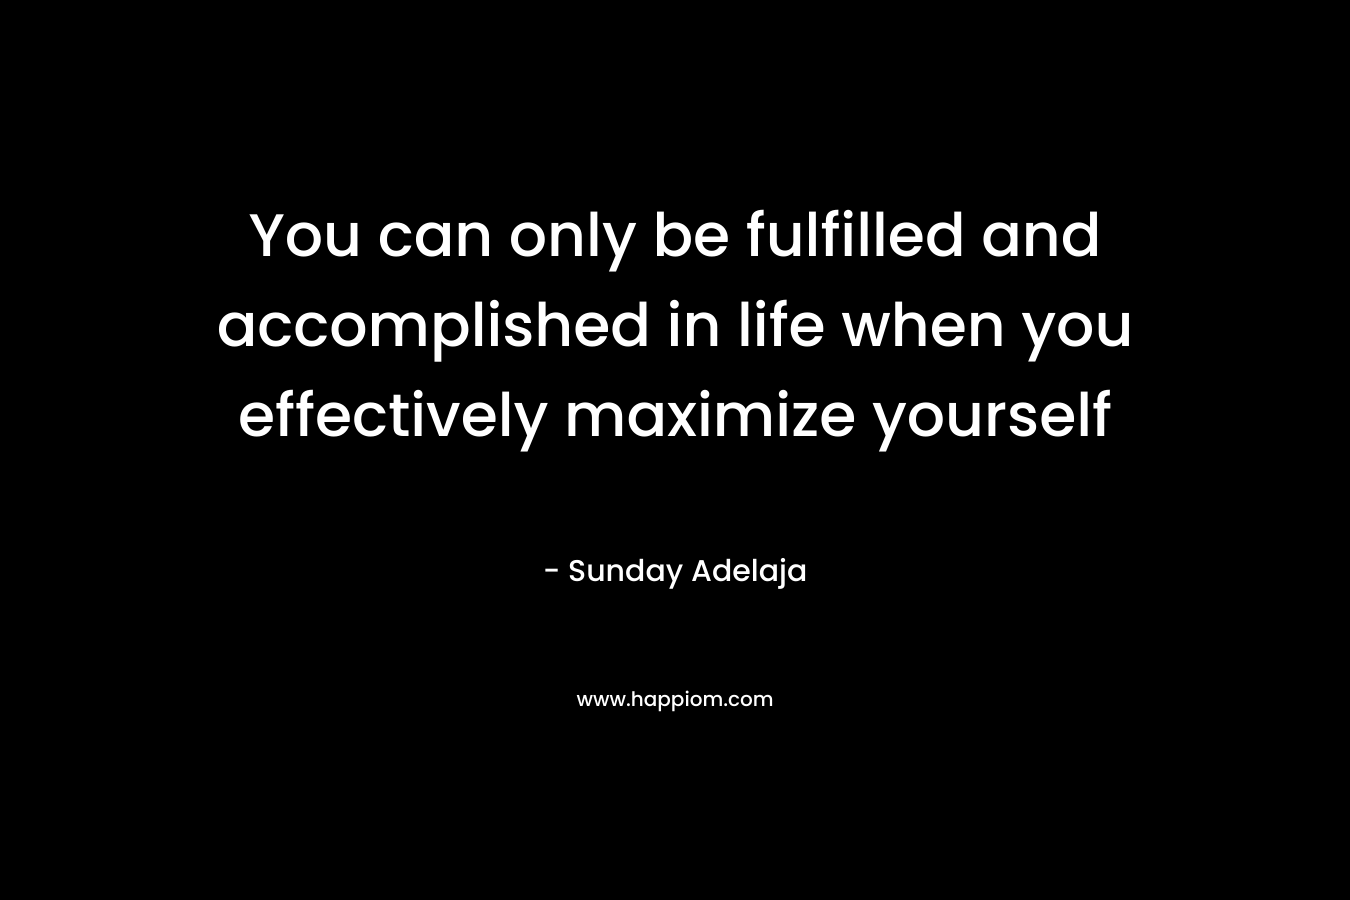 You can only be fulfilled and accomplished in life when you effectively maximize yourself